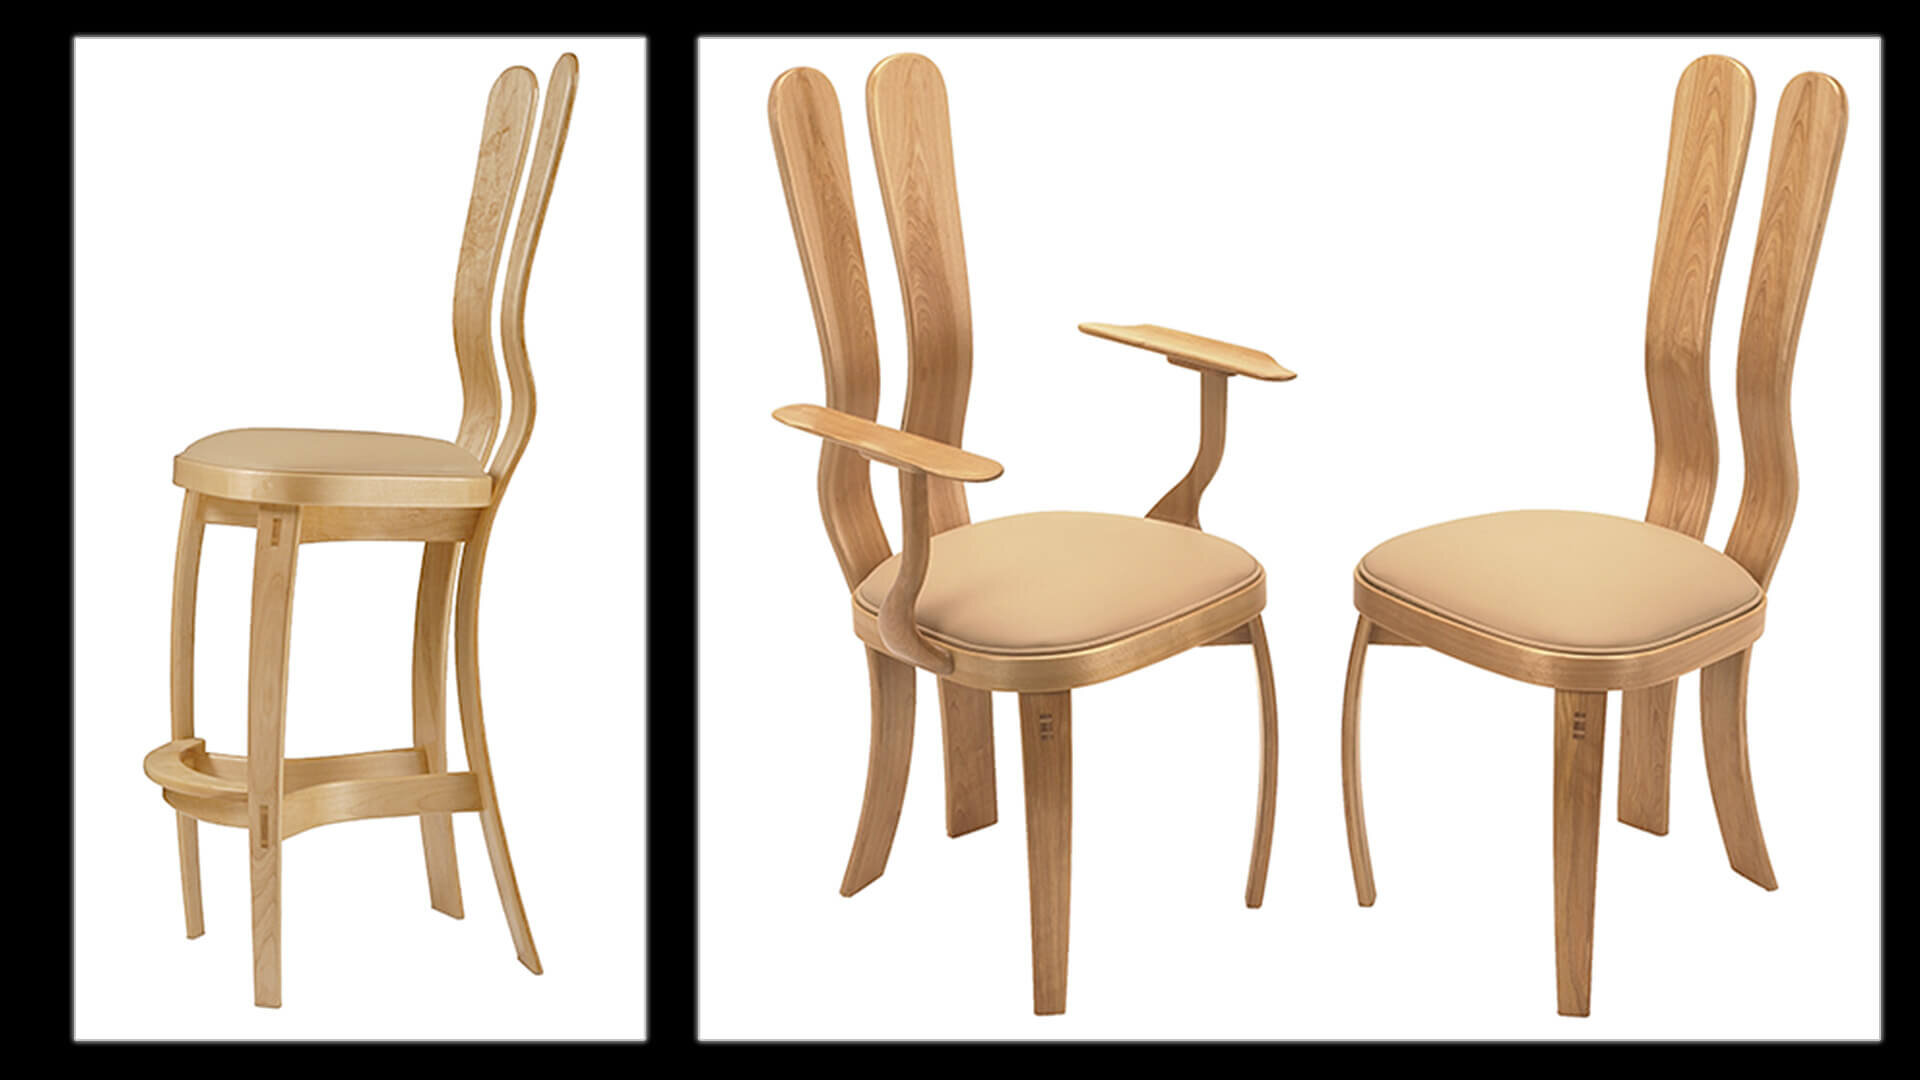 custom-chairs-solutions-by-design.jpg